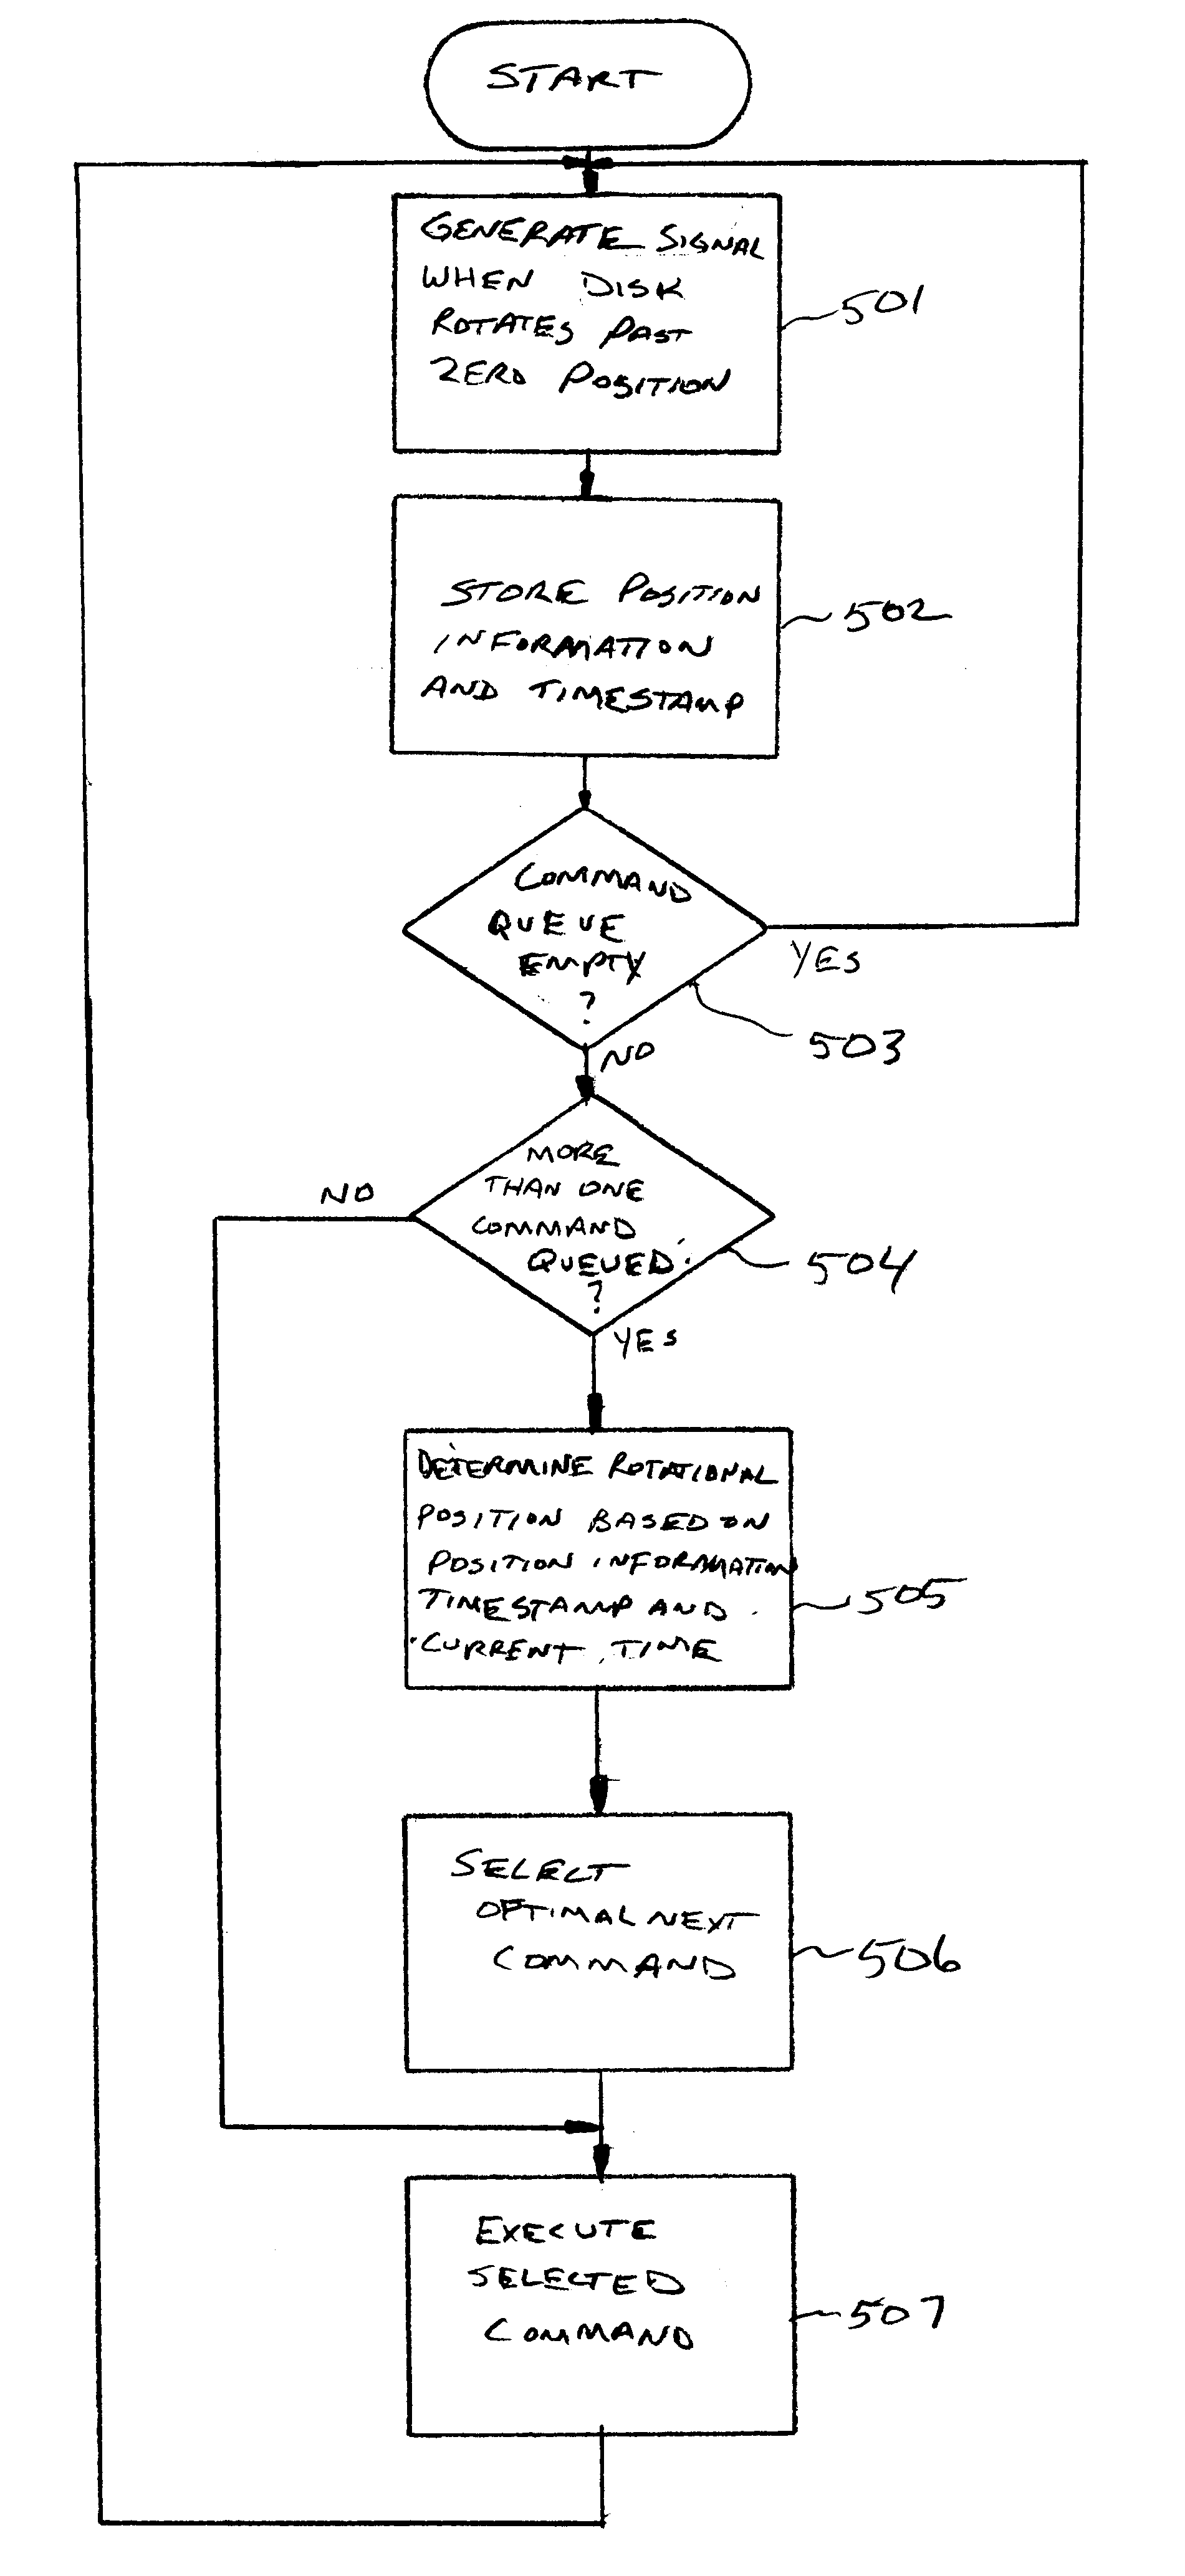 Host controlled optimization of disk storage devices